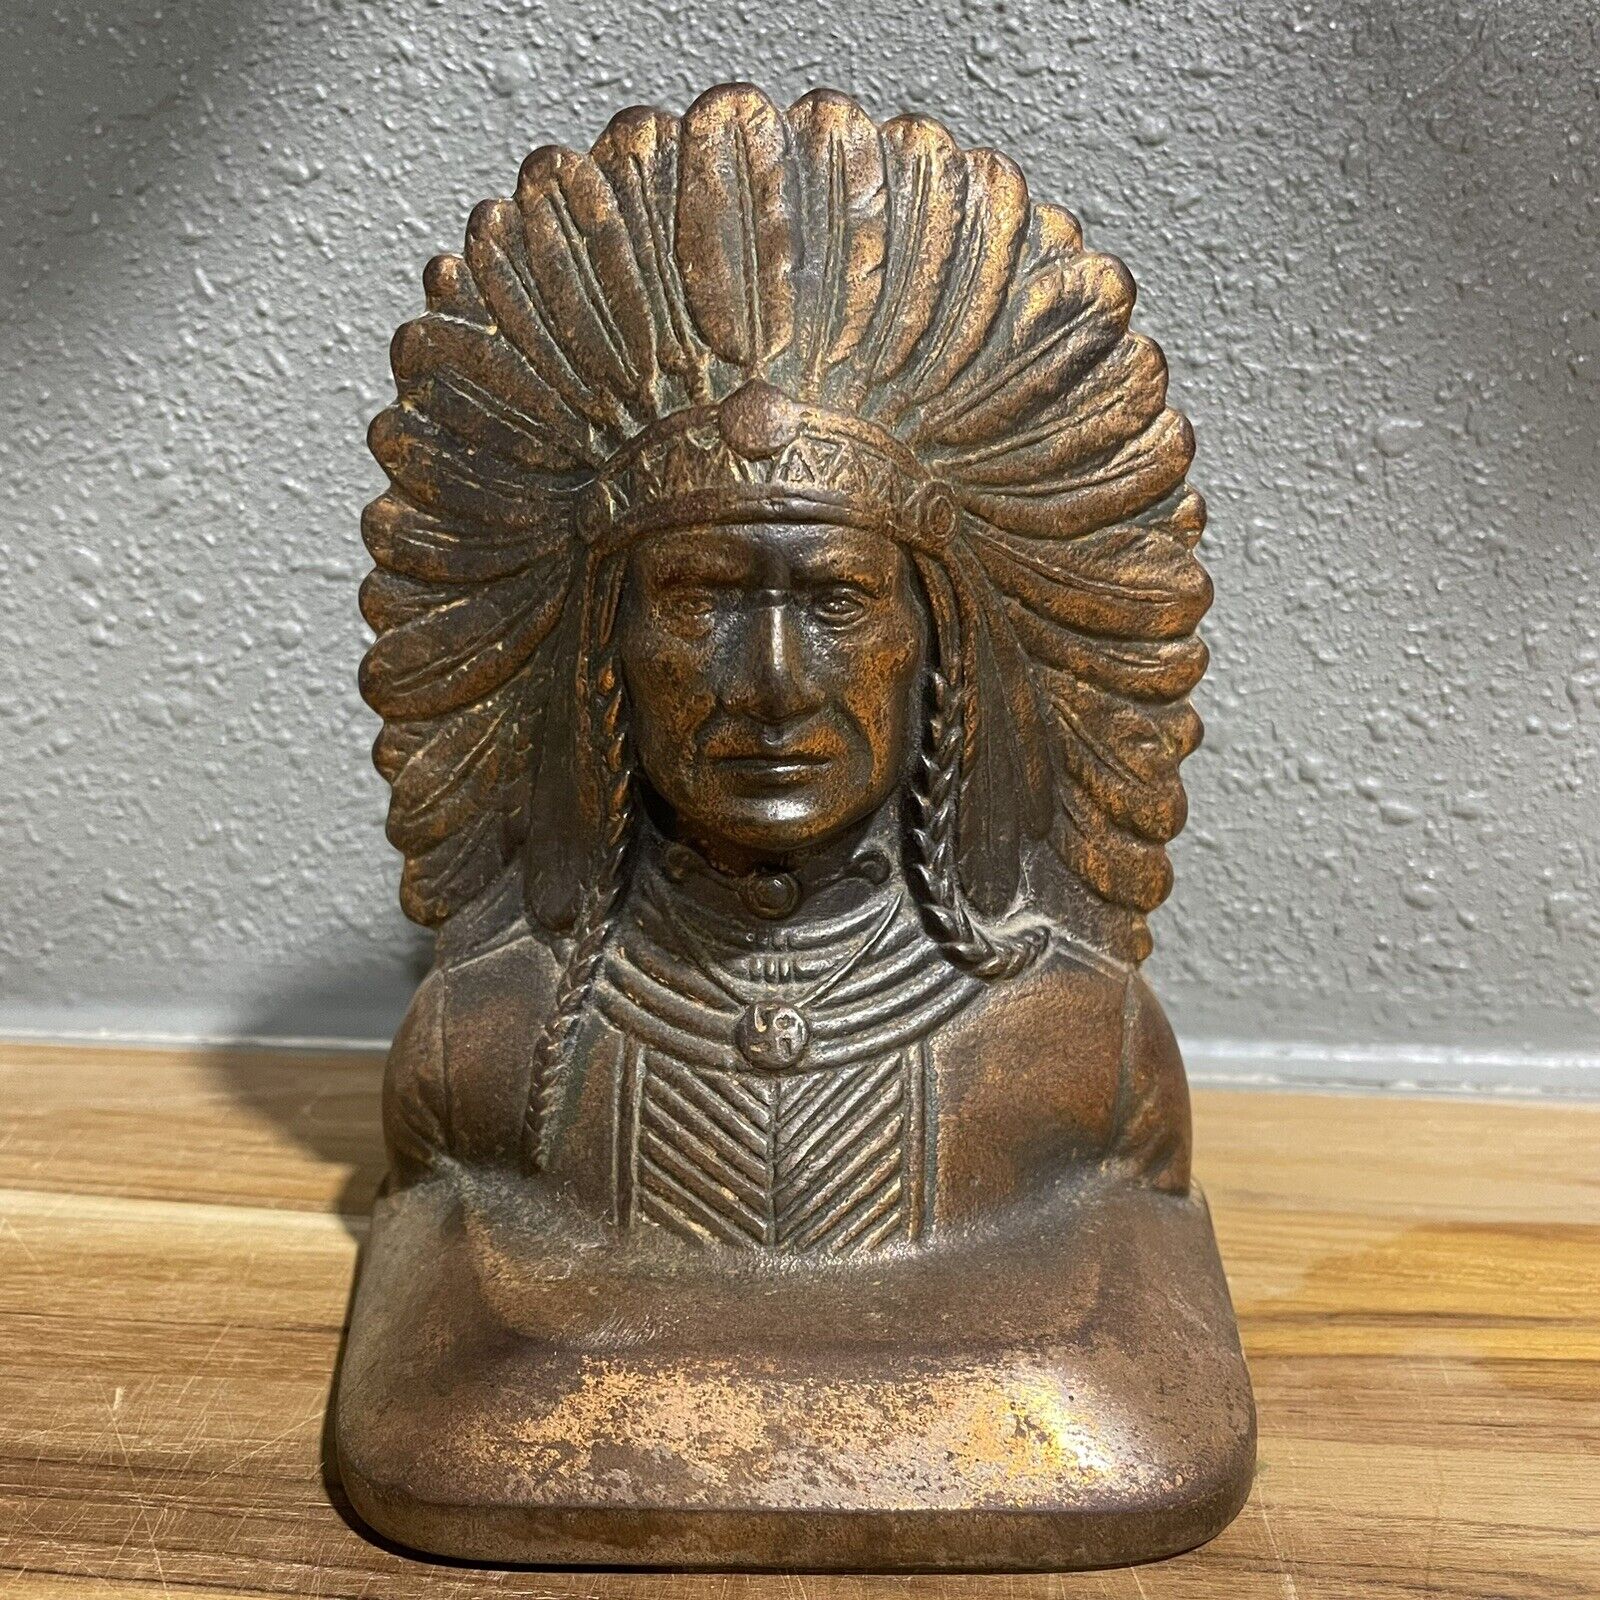 Antique Native American Indian Chief Metal Statue Sculpture Bookends Brass